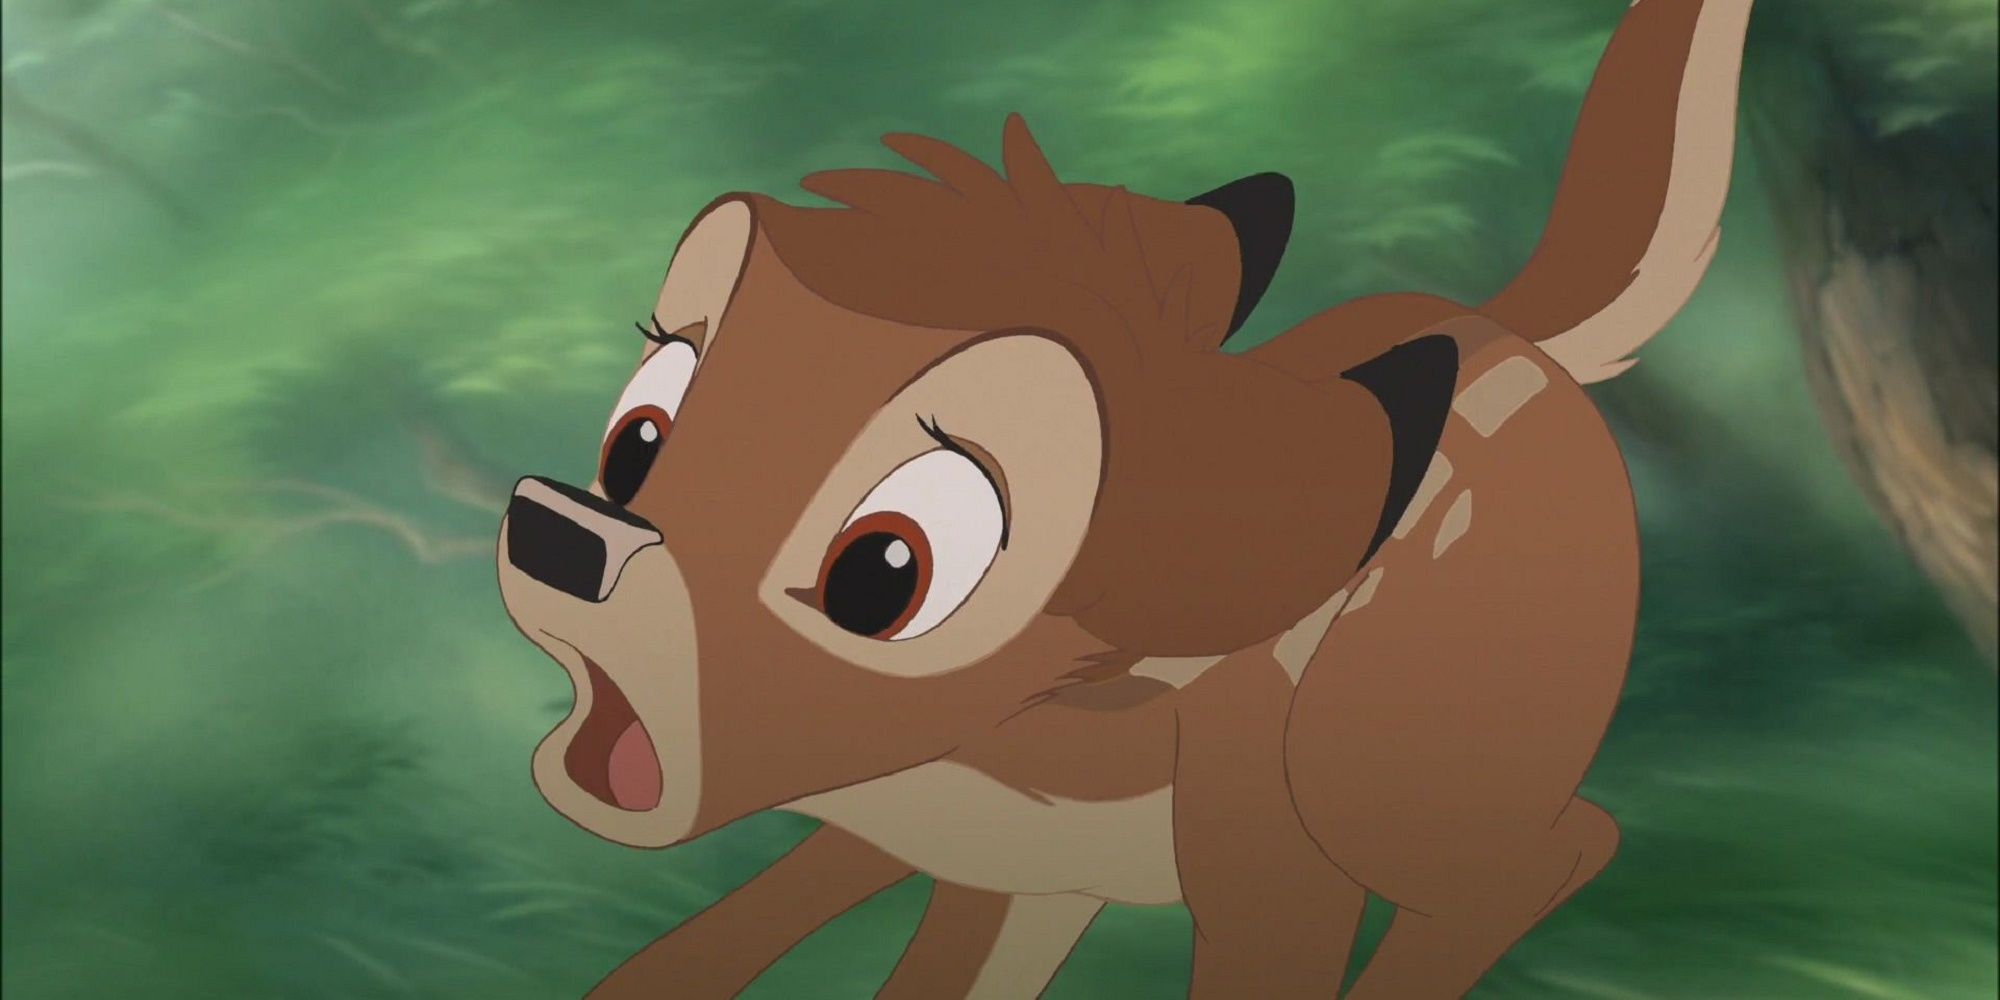 Sarah Polley to Direct Live-Action 'Bambi' for Disney